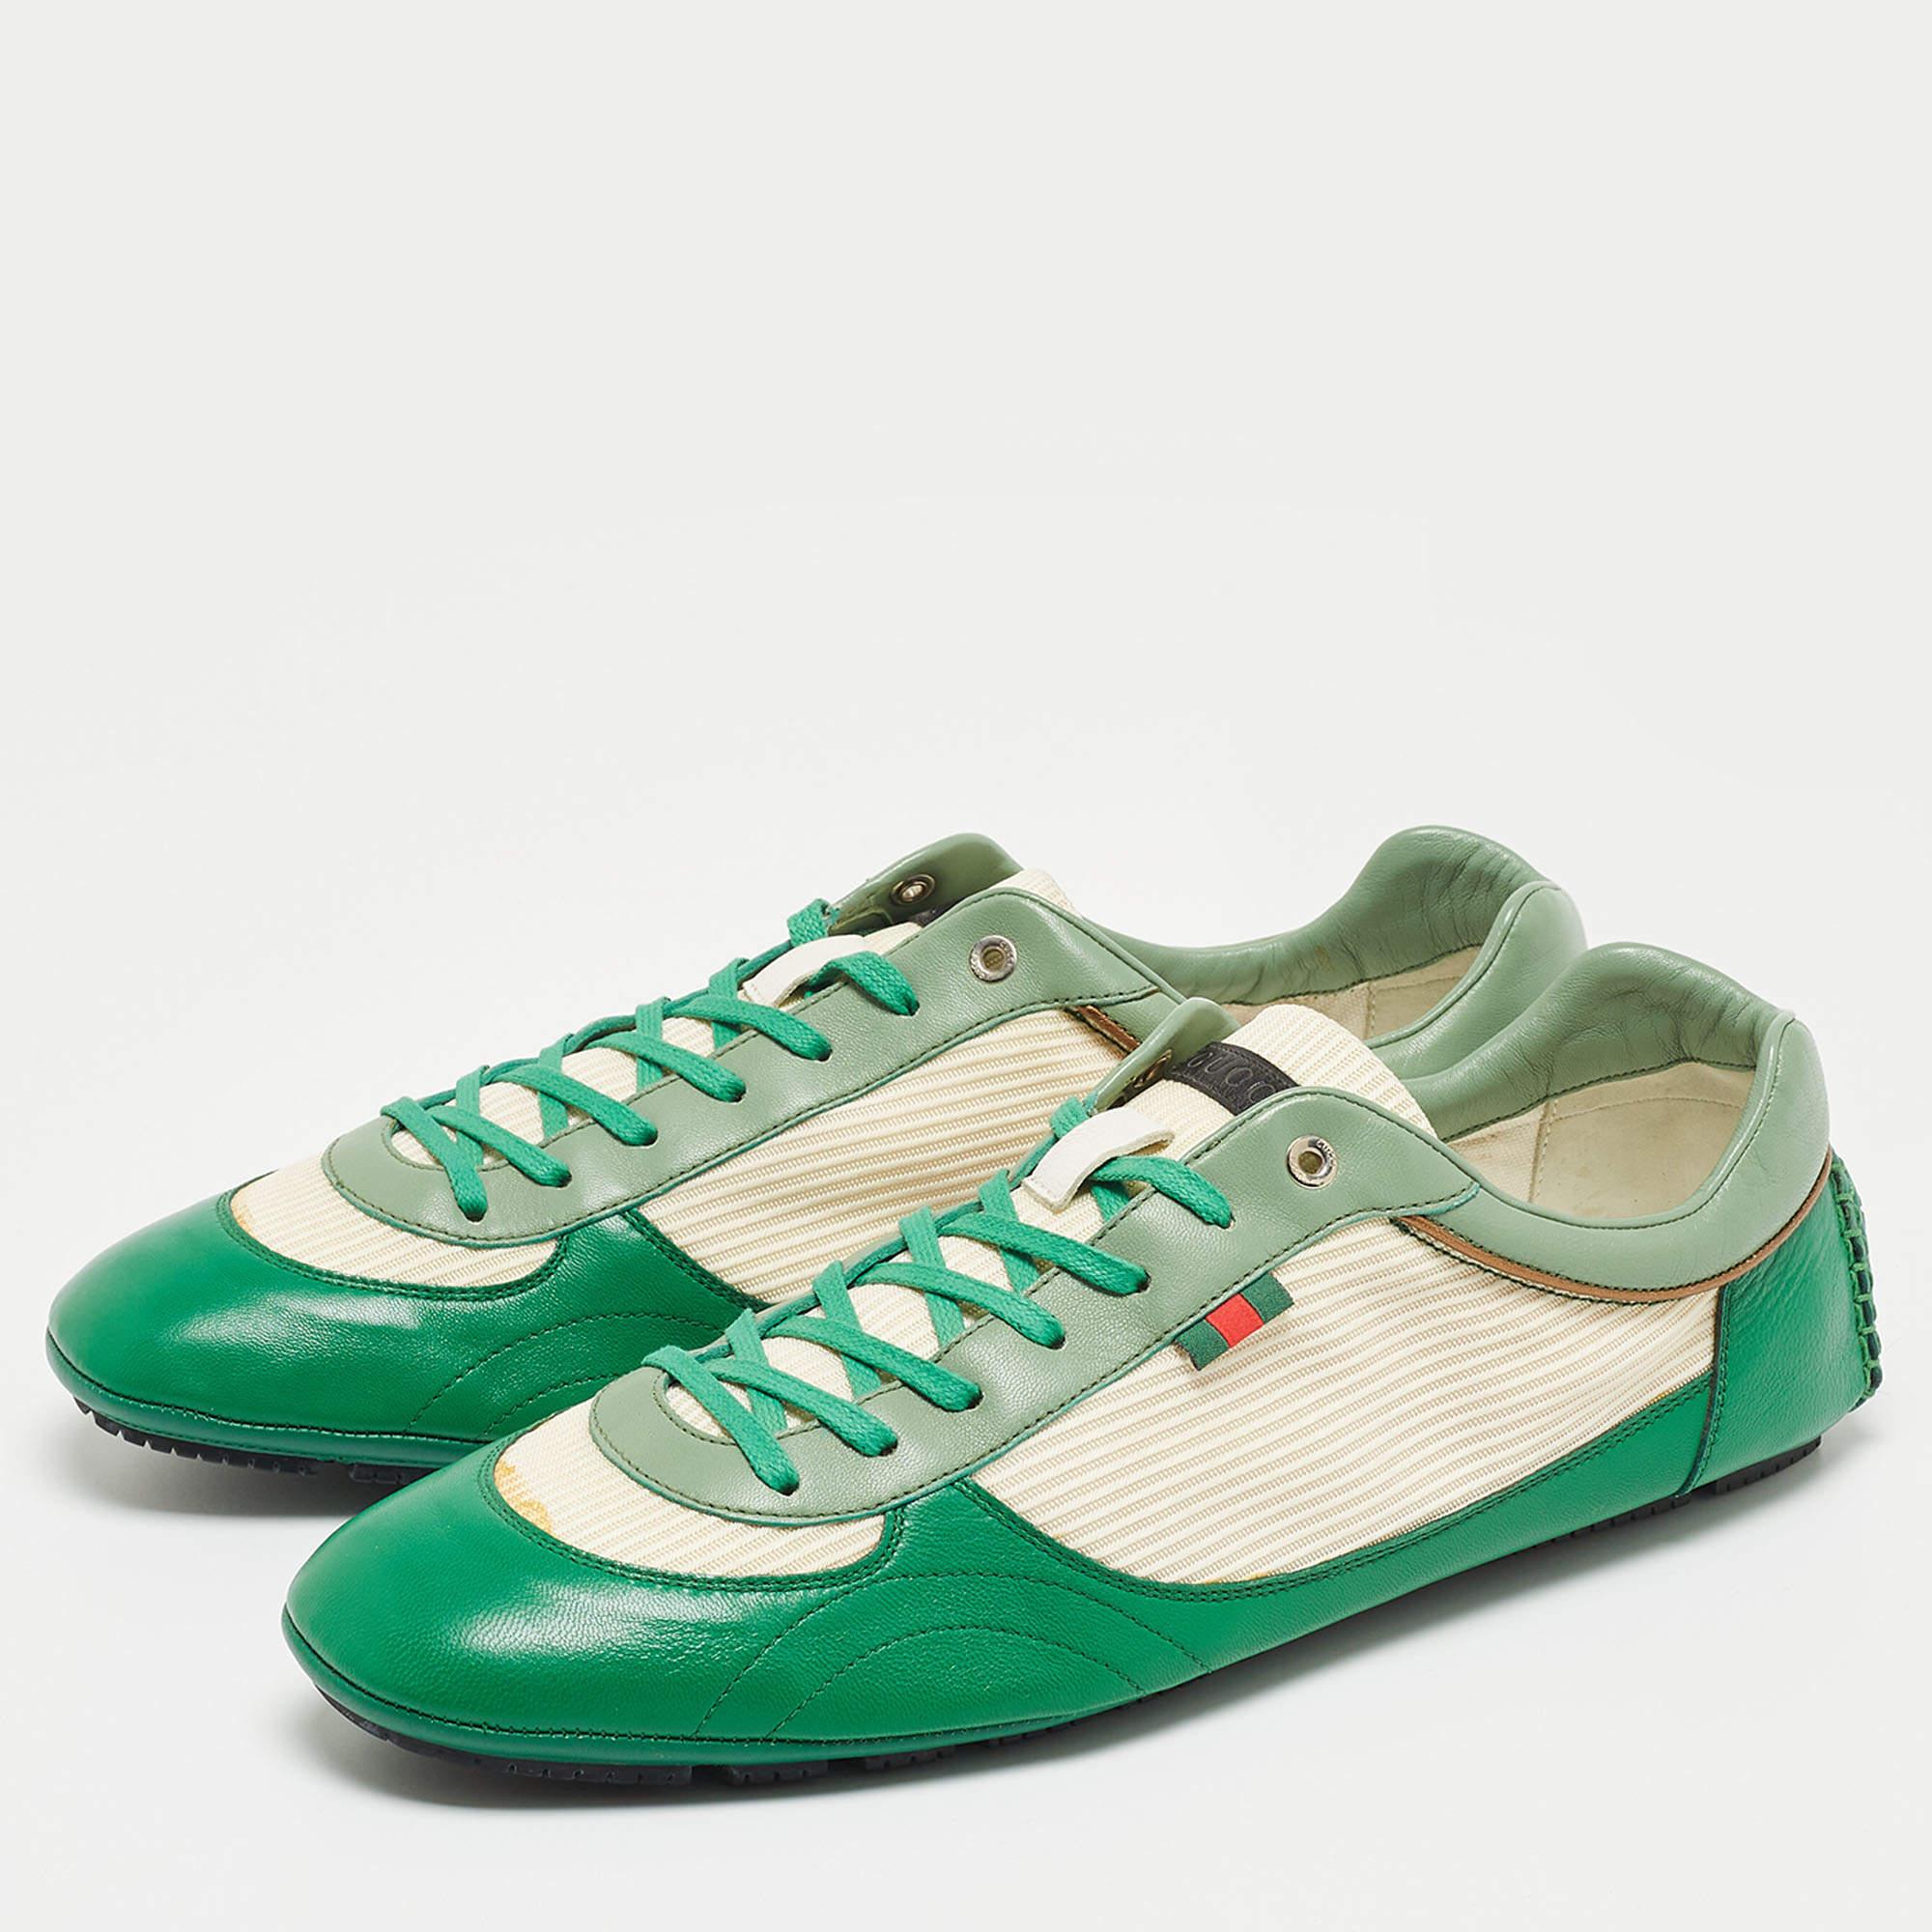 Give your outfit a luxe update with this pair of Gucci green sneakers. The shoes are sewn perfectly to help you make a statement in them for a long time.

